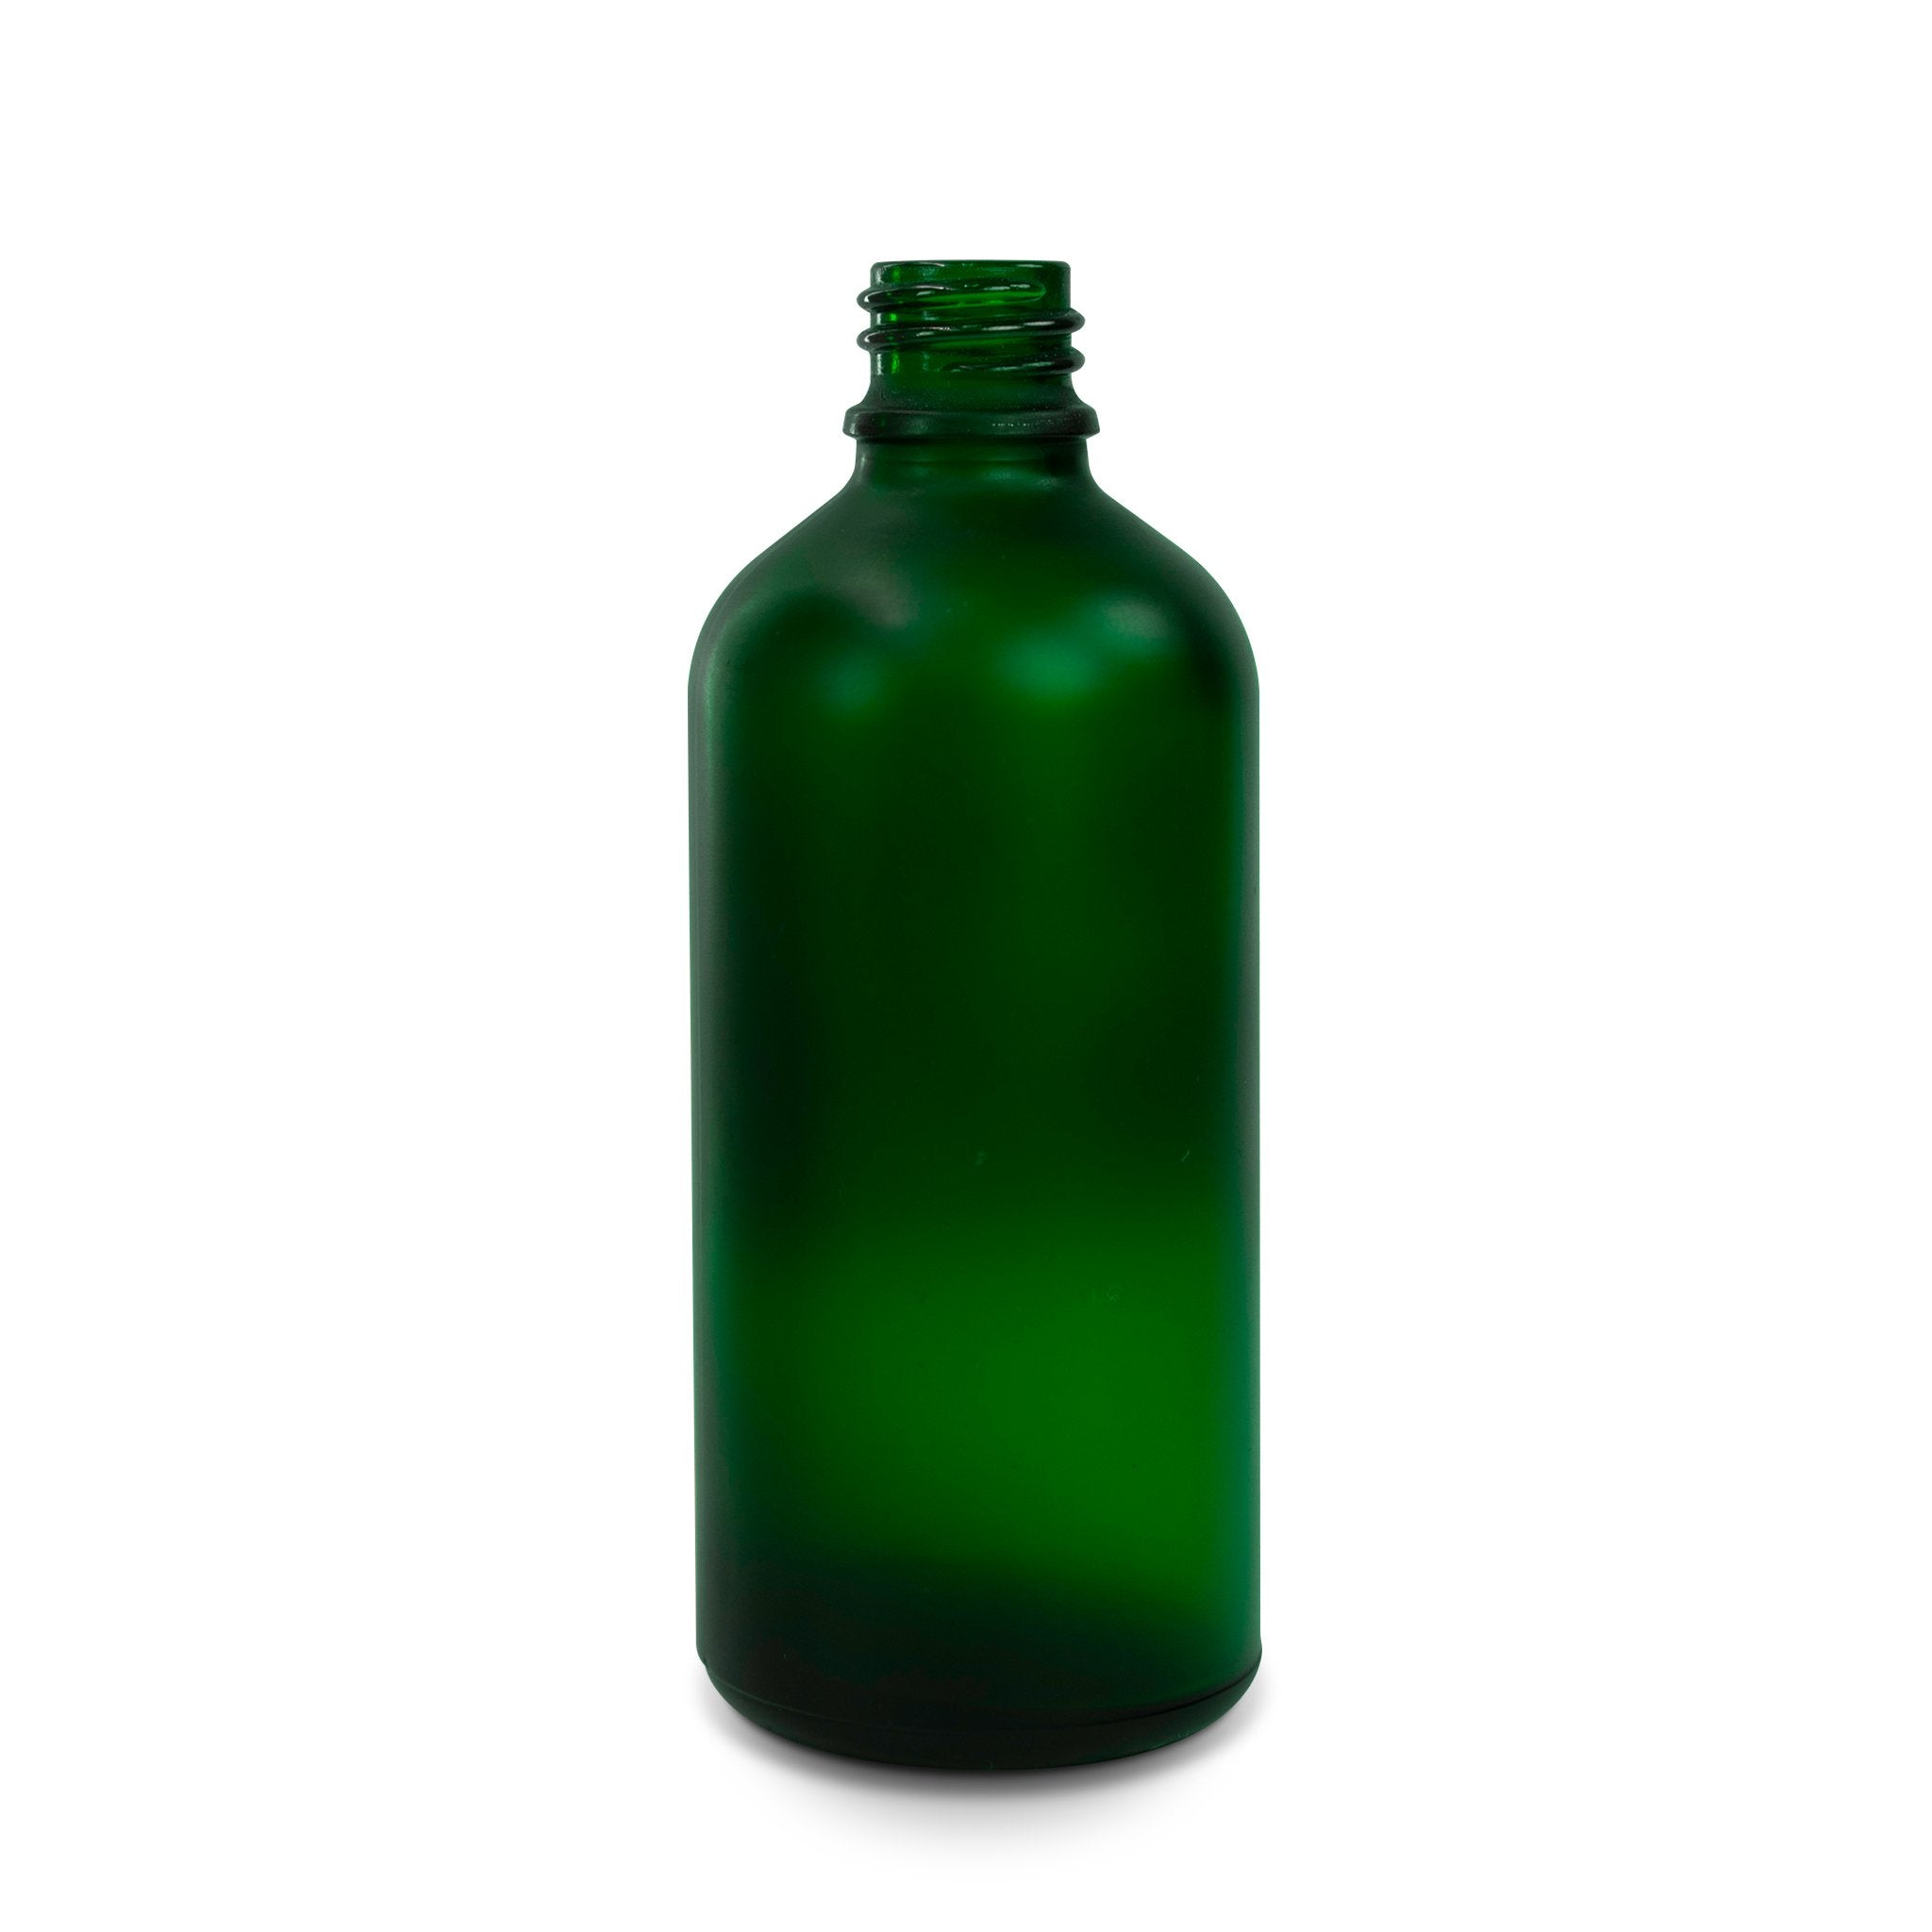 Stone Candles Supplies Bottle Room Spray and Diffuser Emerald Green